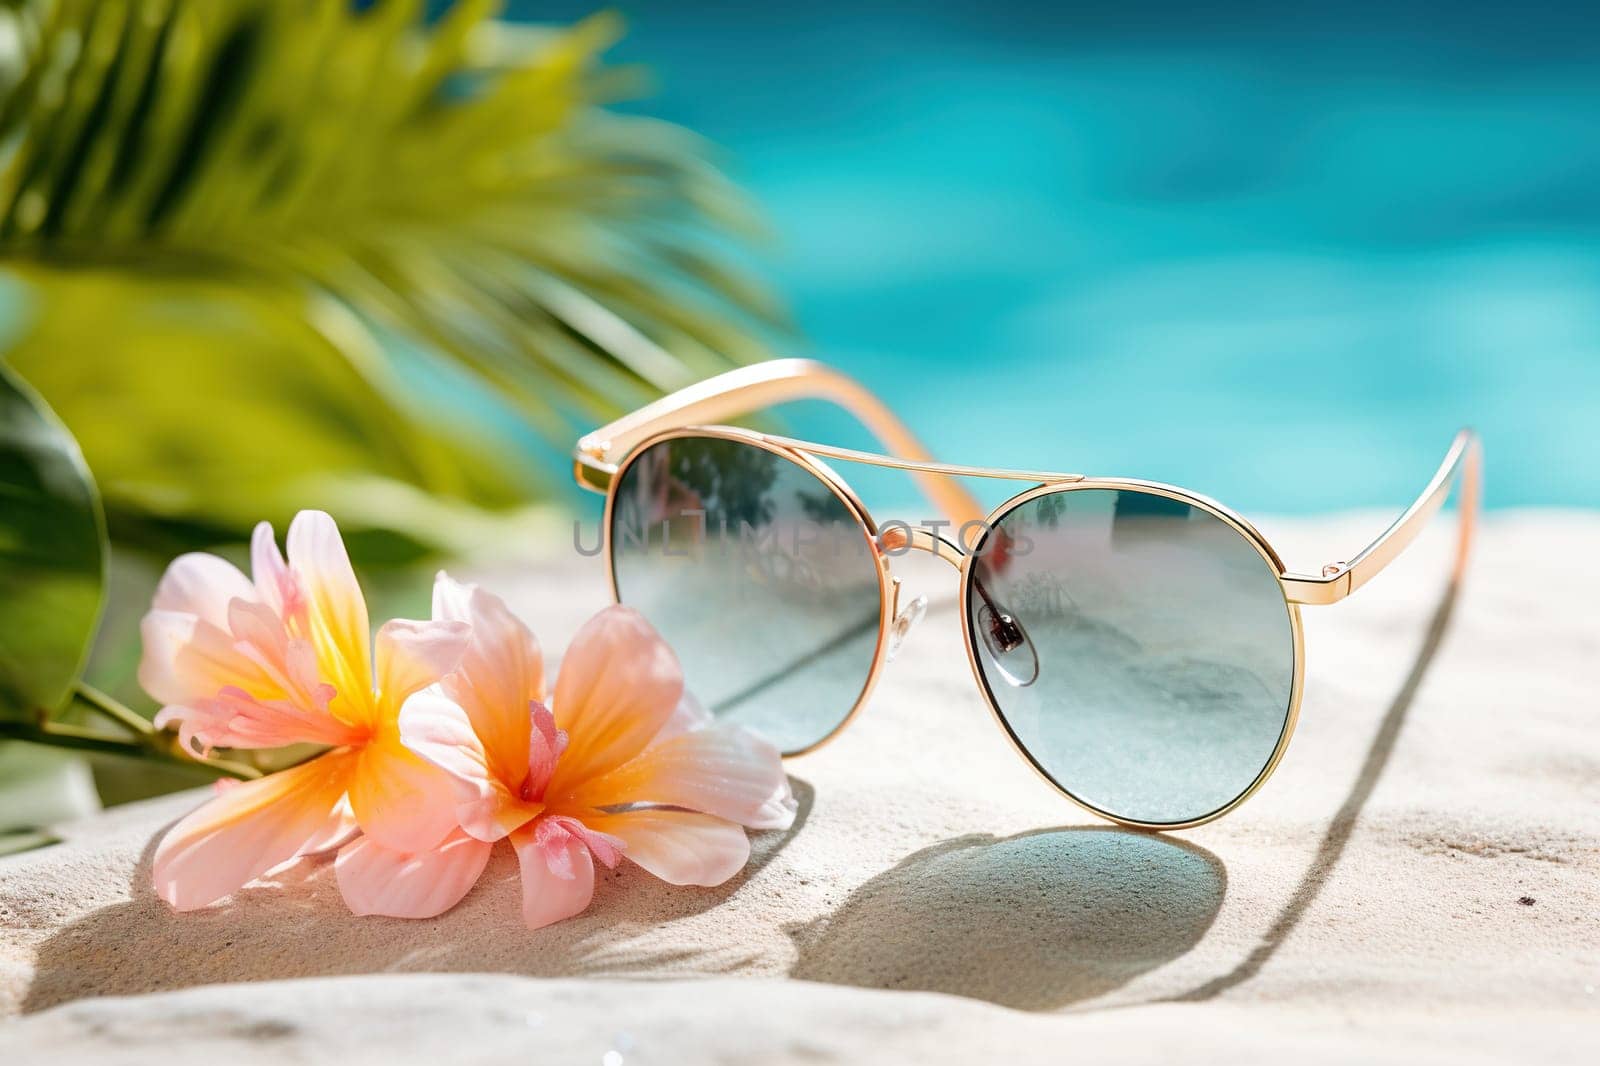 Sunglasses on the sand with flowers against a background of blue water and palm leaves. Resort vacation concept.